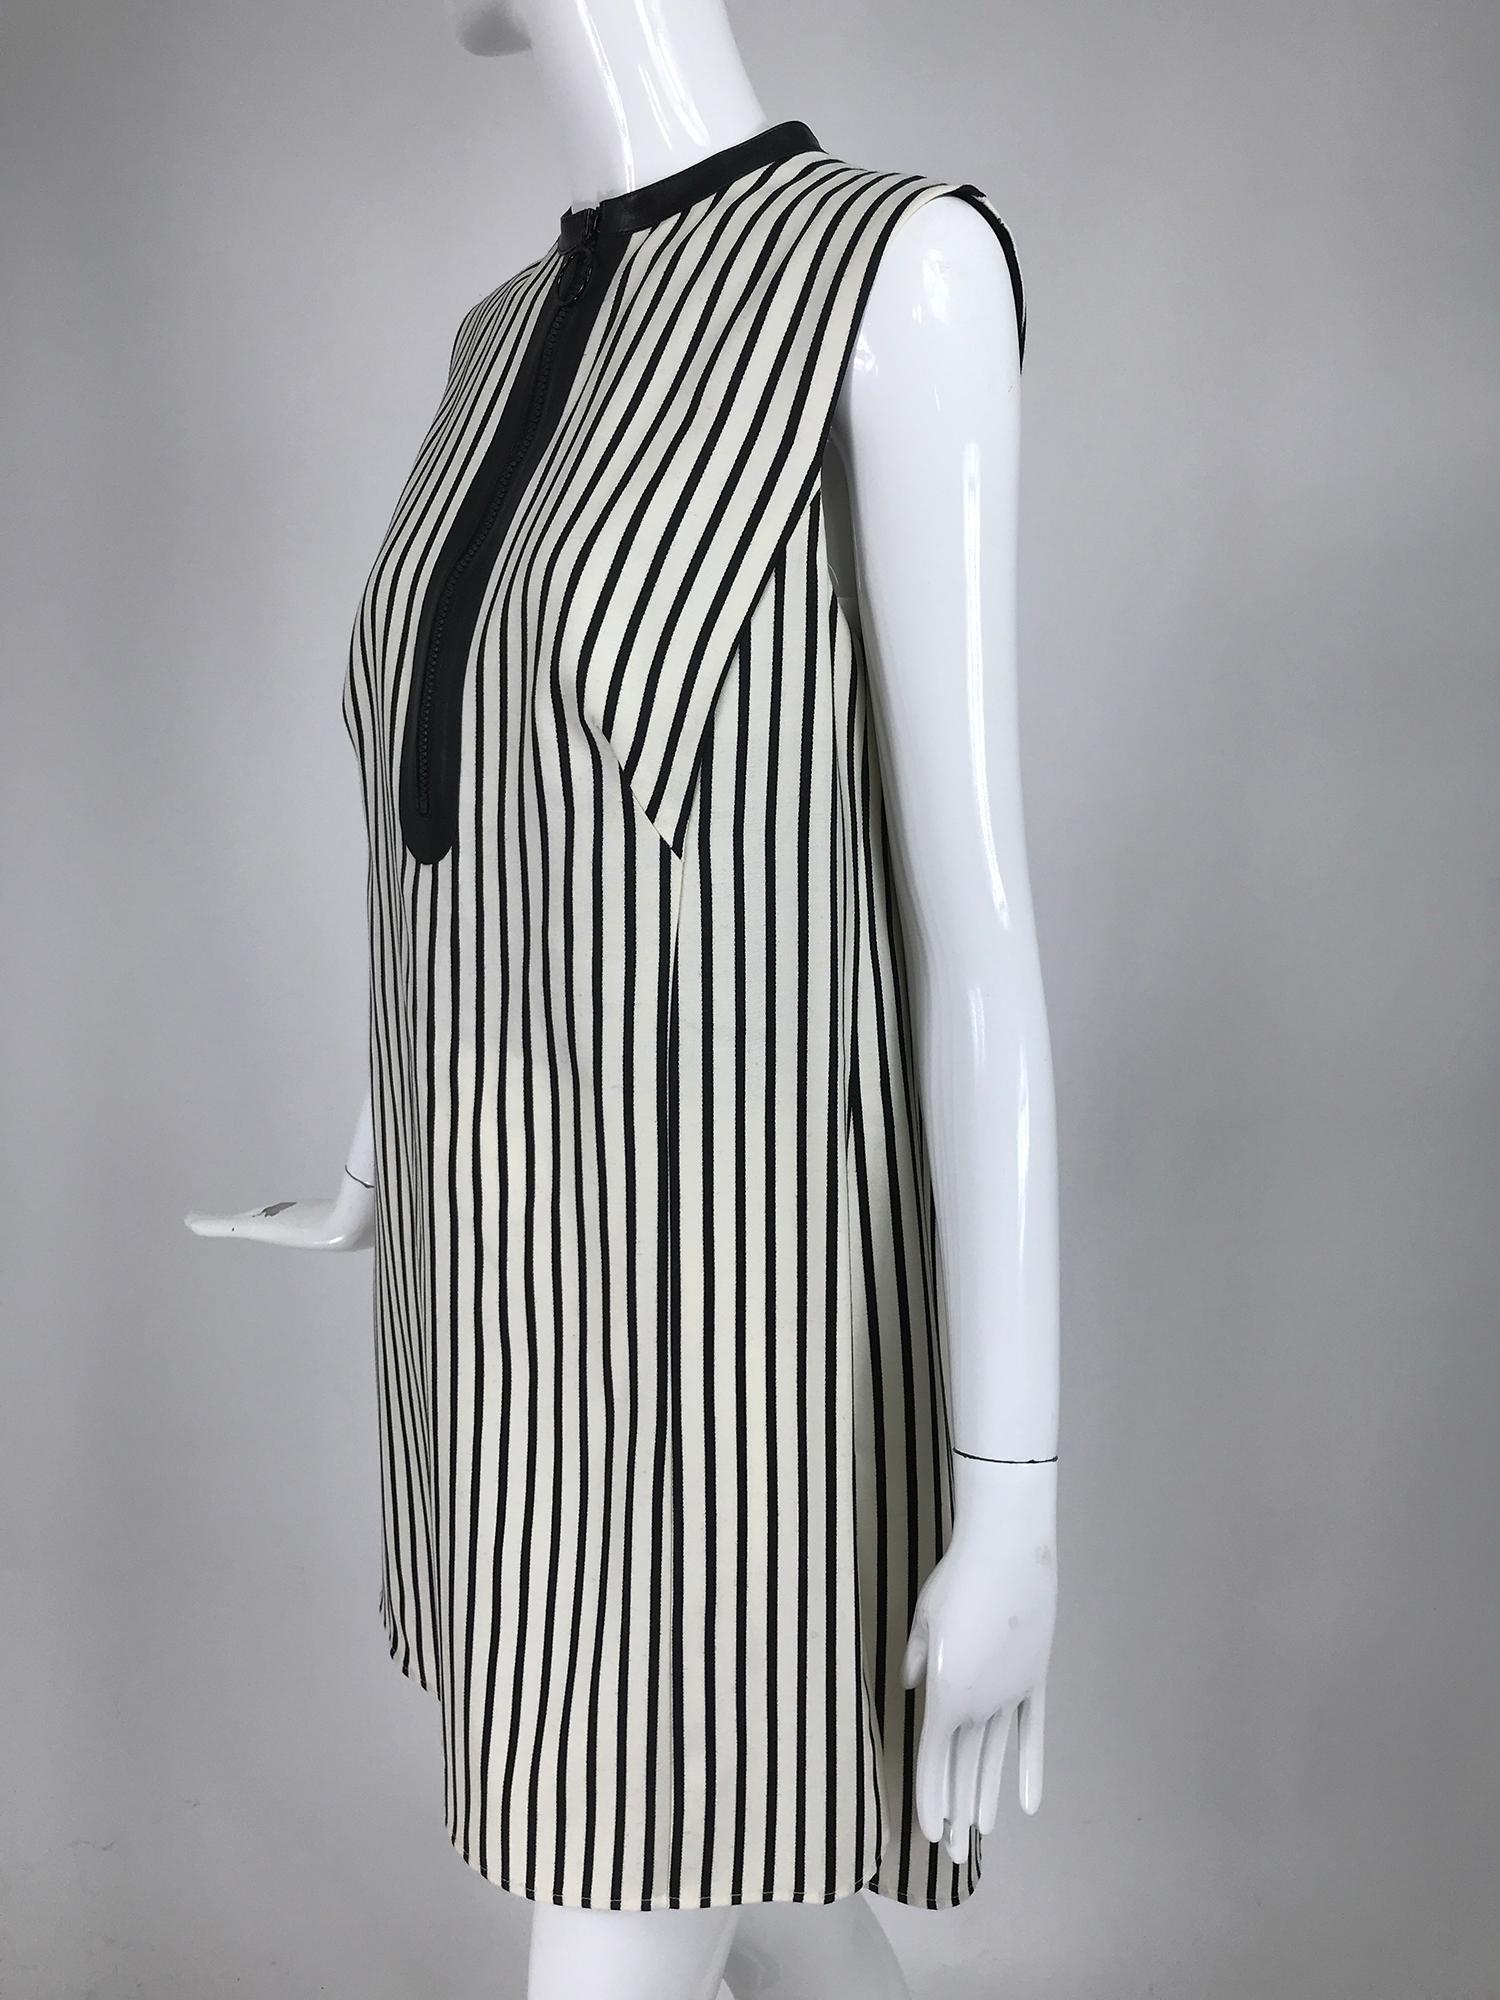 Akris Punto black and white stripe zipper front tunic. Sleeveless tunic of fine soft wool twill has placket front and neck trim of black vinyl with a chunky black zipper. Bust side darts and side hem vents, the top has shirt tail hem and is longer